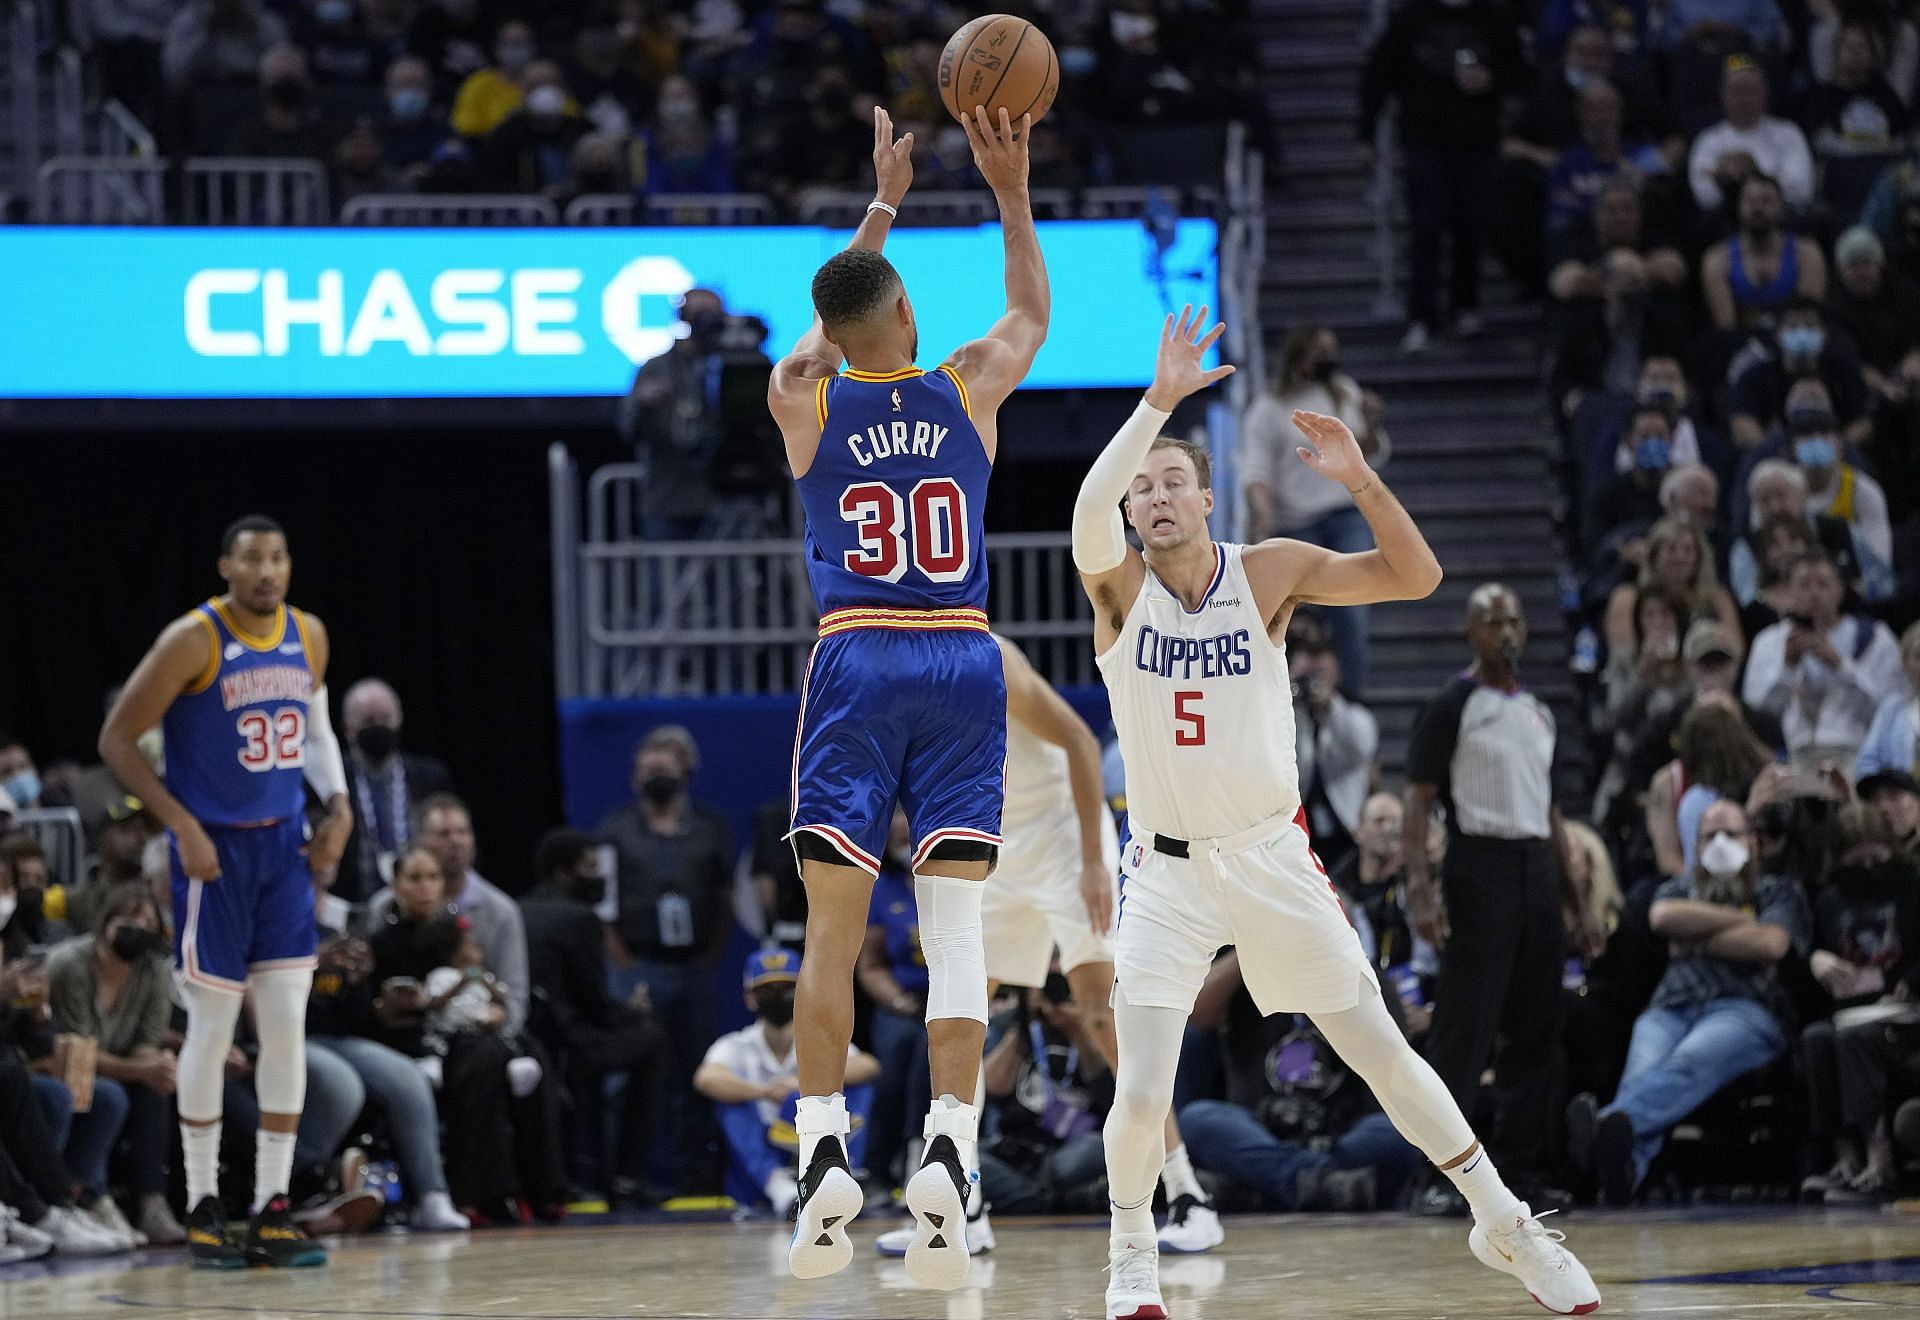 Stephen Curry shoots over Luke Kennard at the LA Clippers v Golden State Warriors game